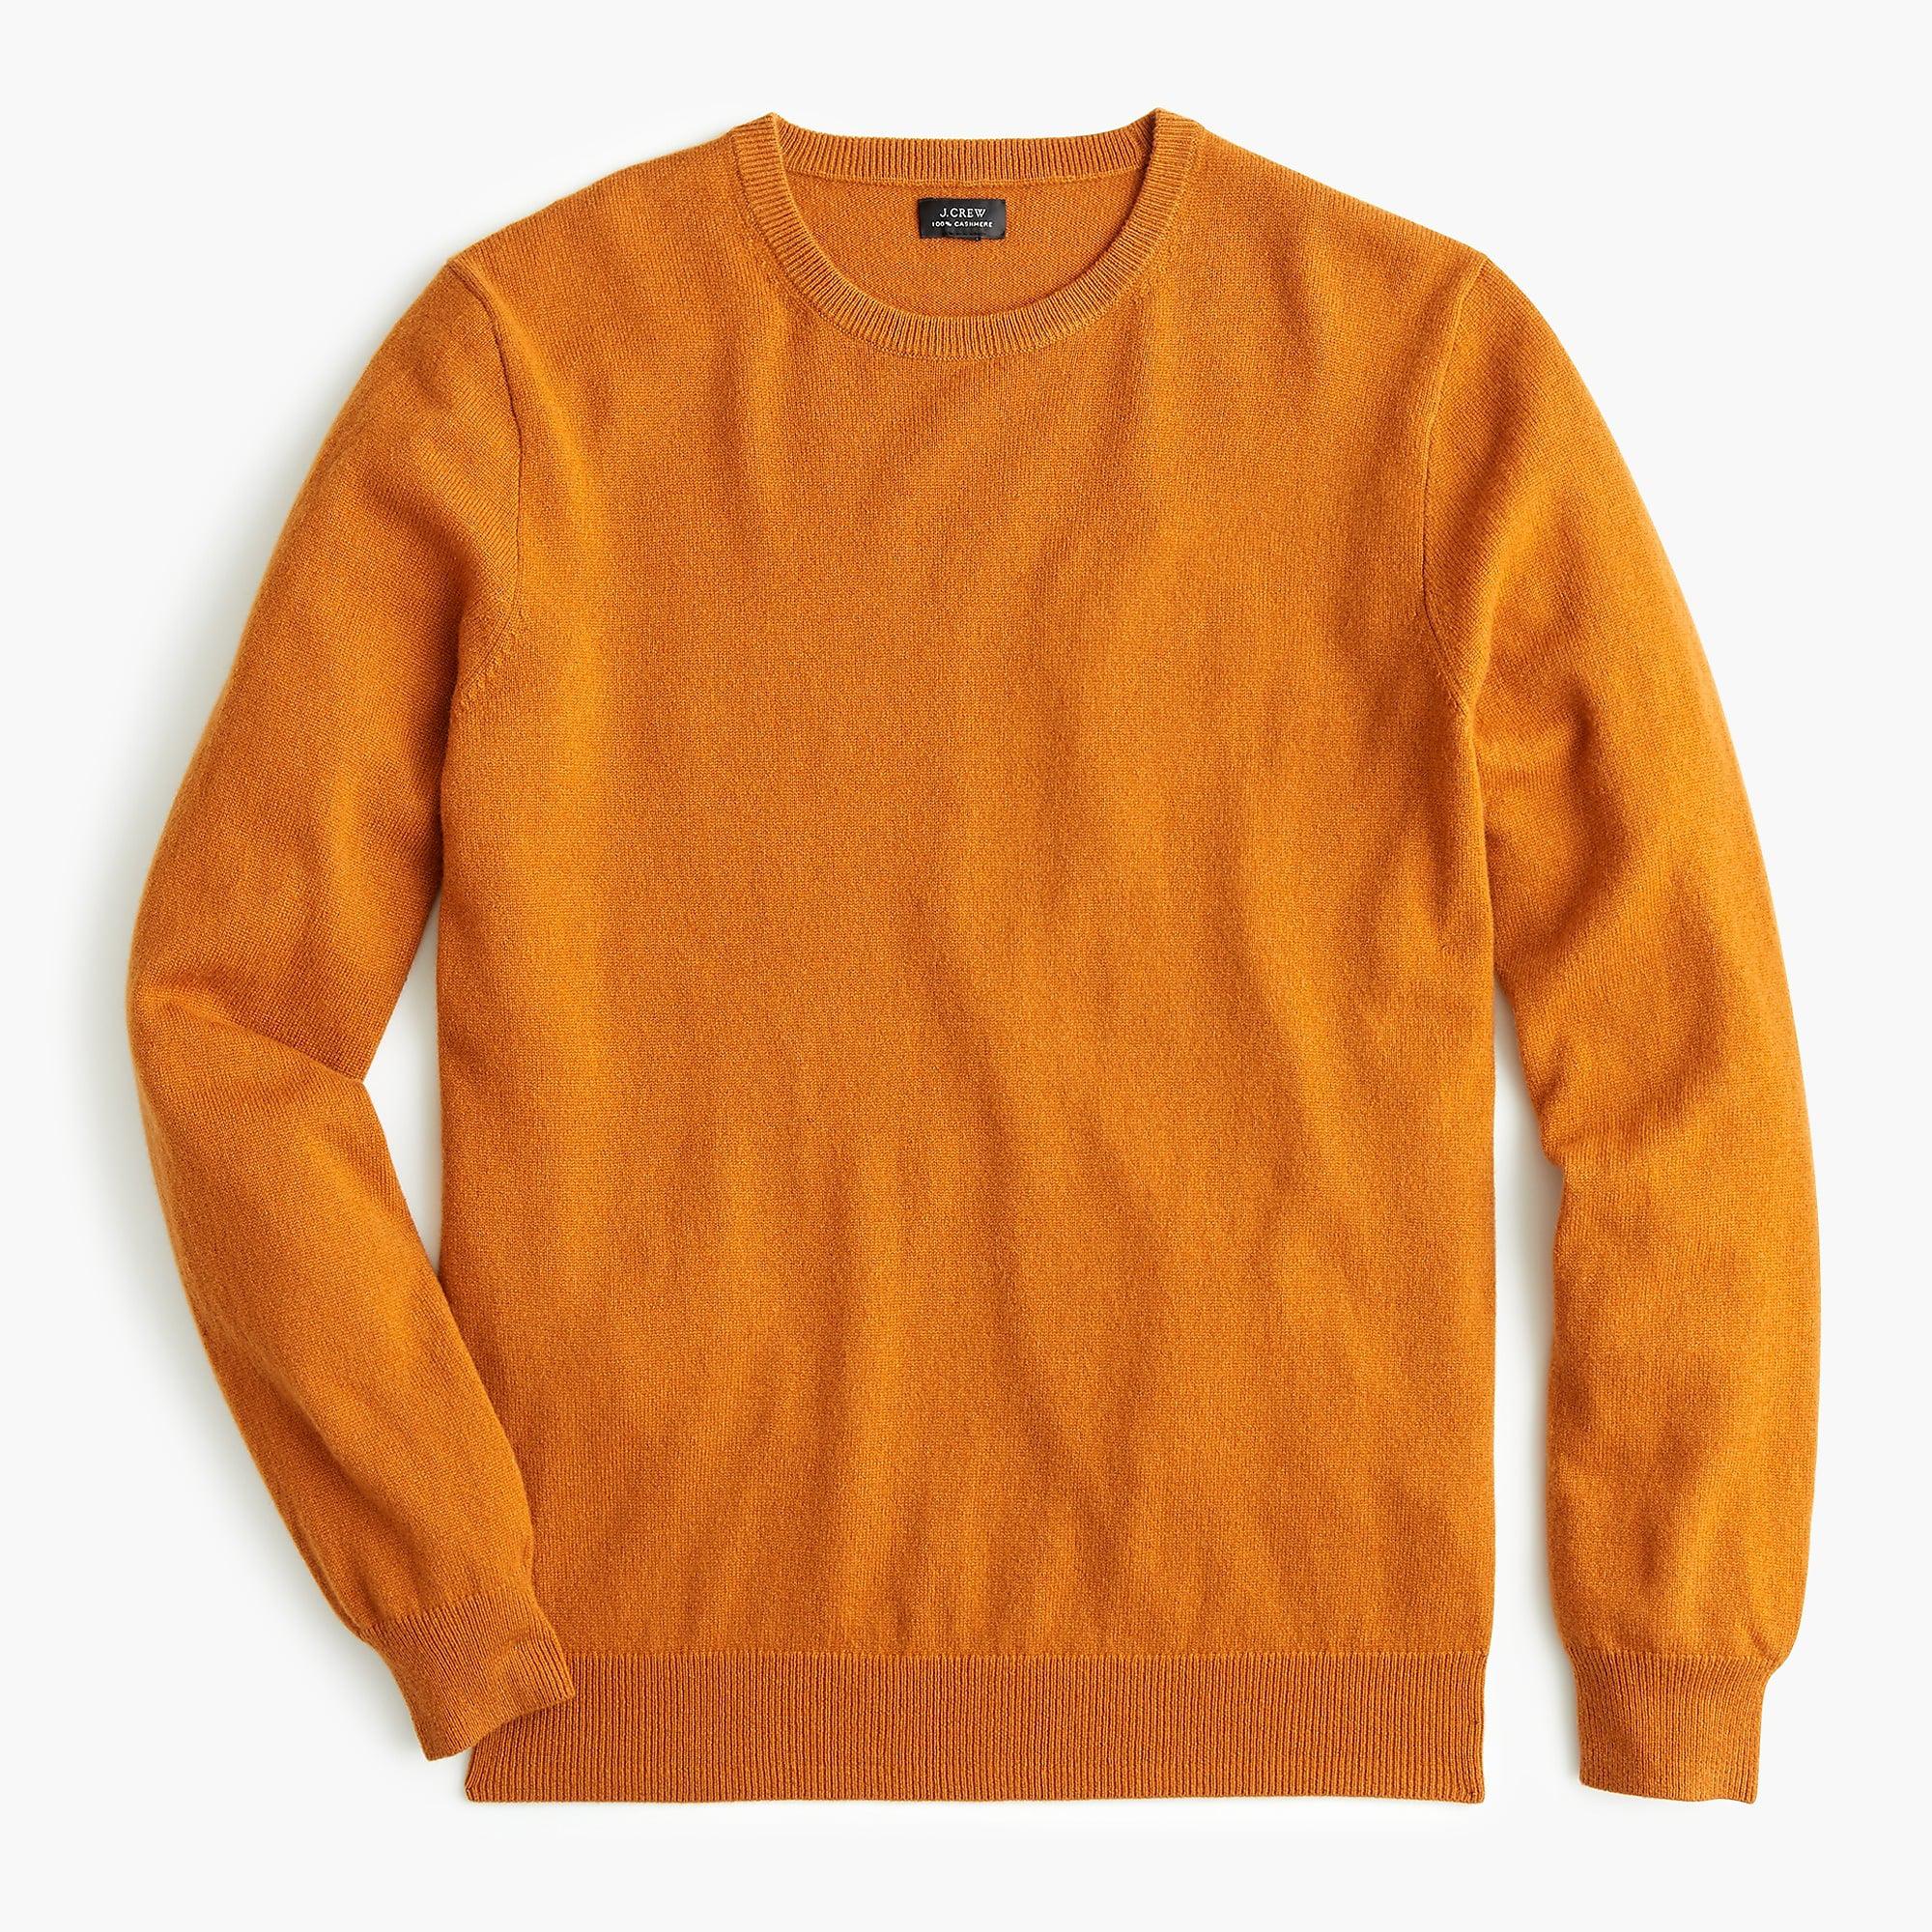 J.Crew Everyday Cashmere Crewneck Sweater In Solid in Orange for Men - Lyst